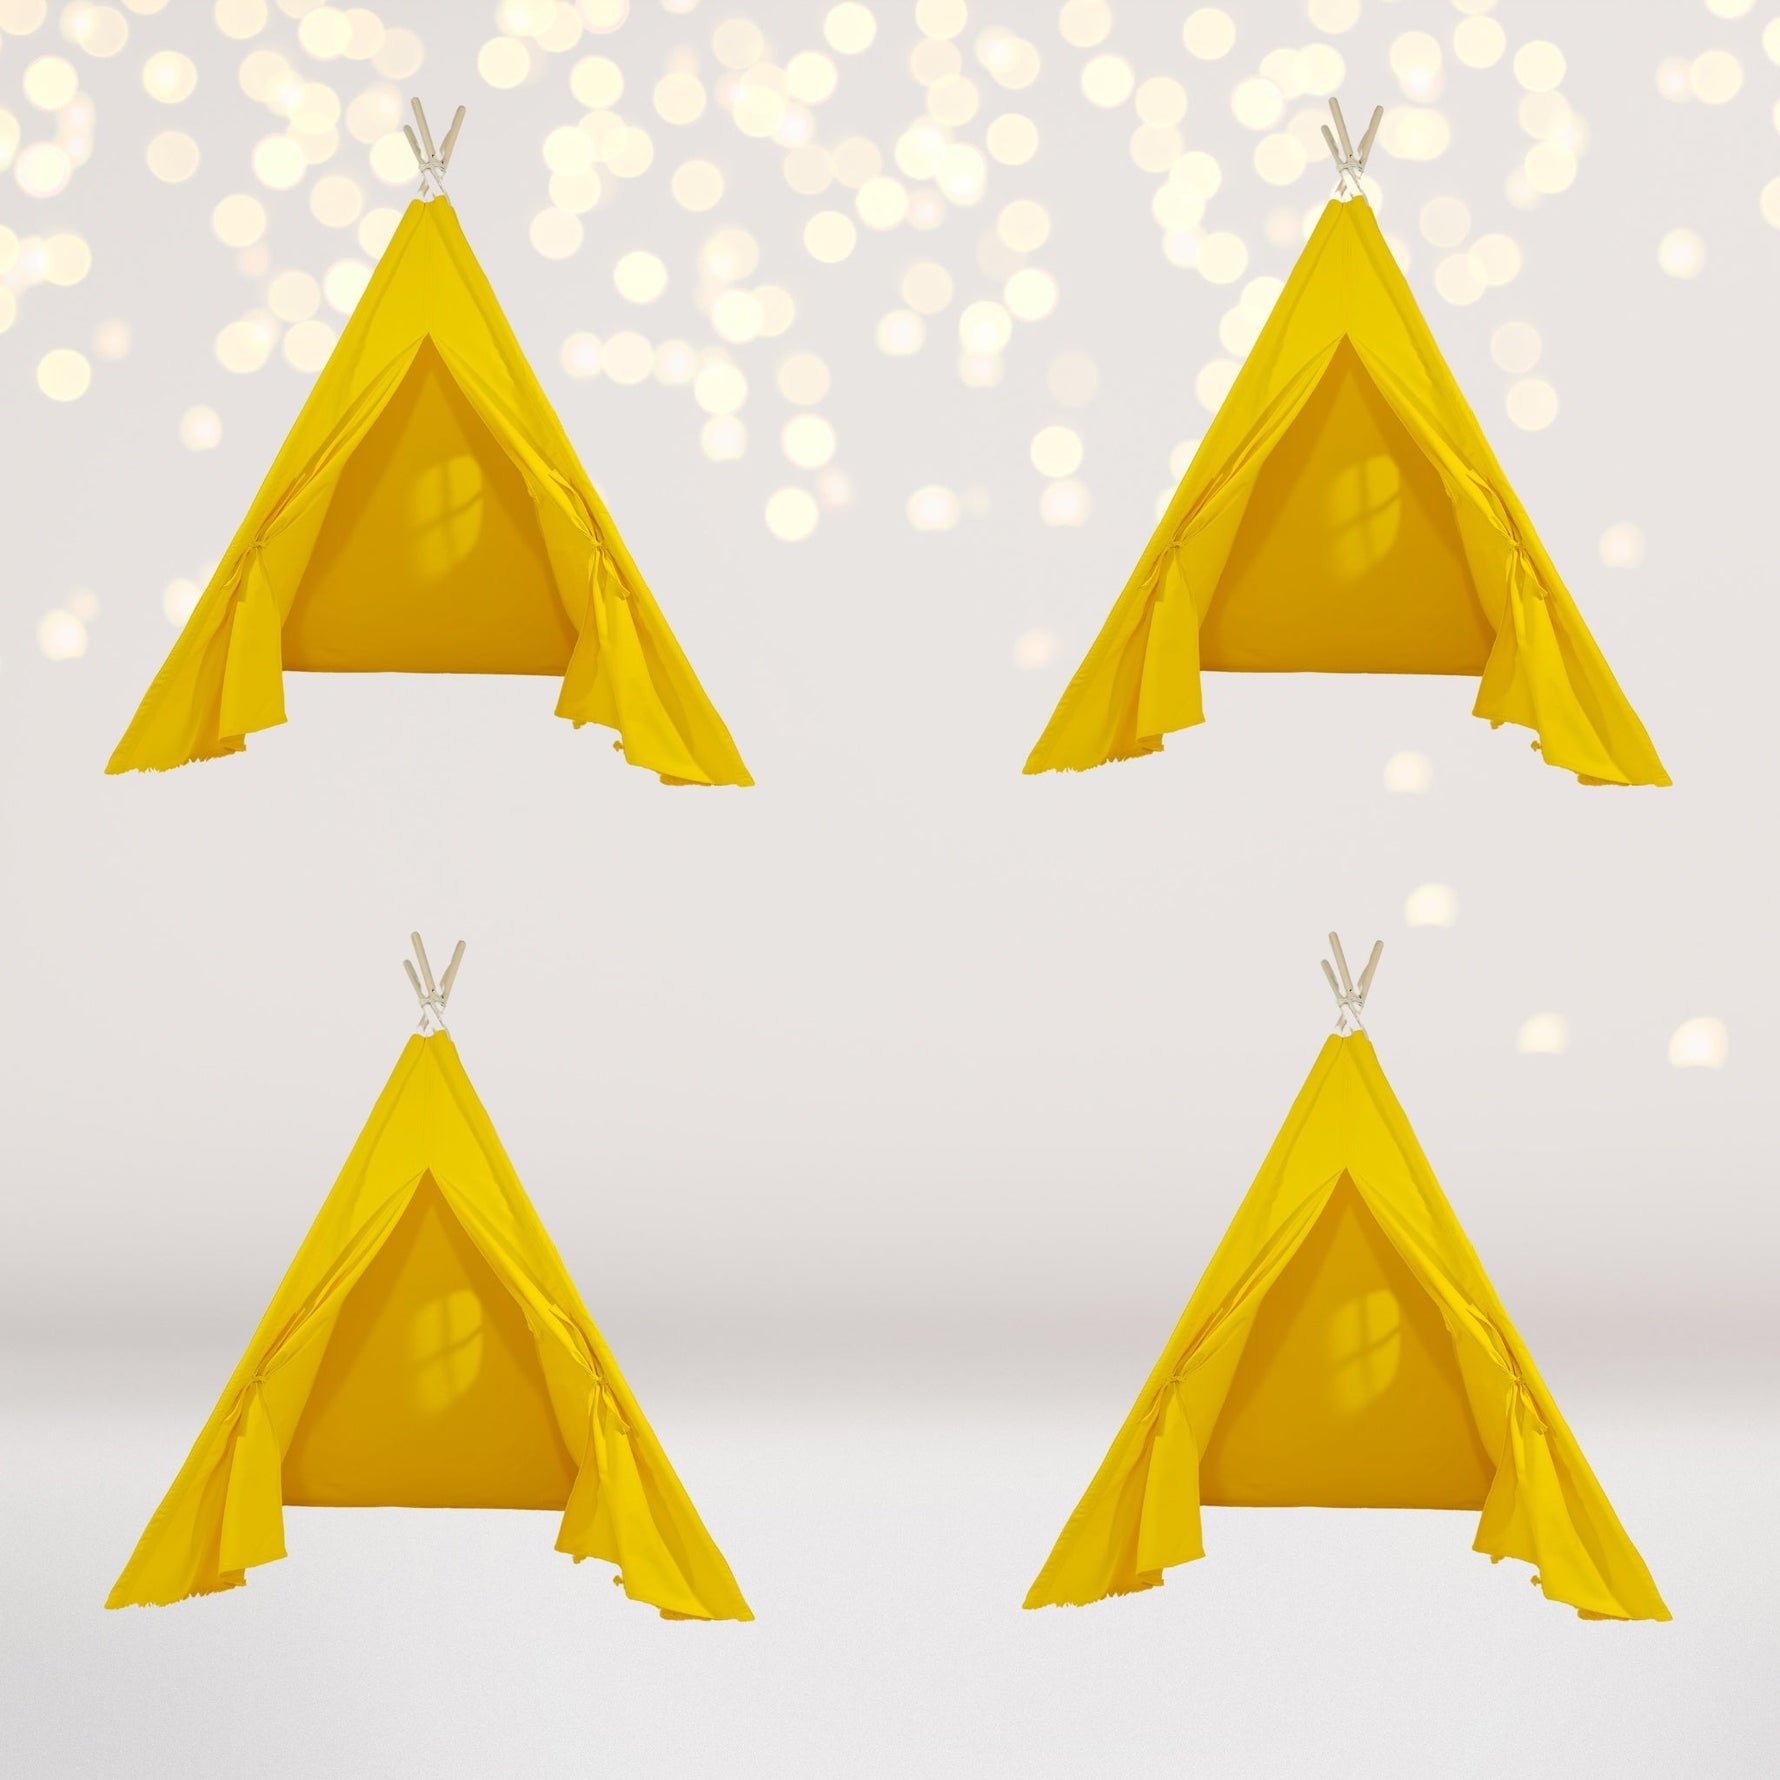 4 pack Kids Sleepover Tents-LUXE Kids Teepee Tent with Lights-Party Pack Yellow